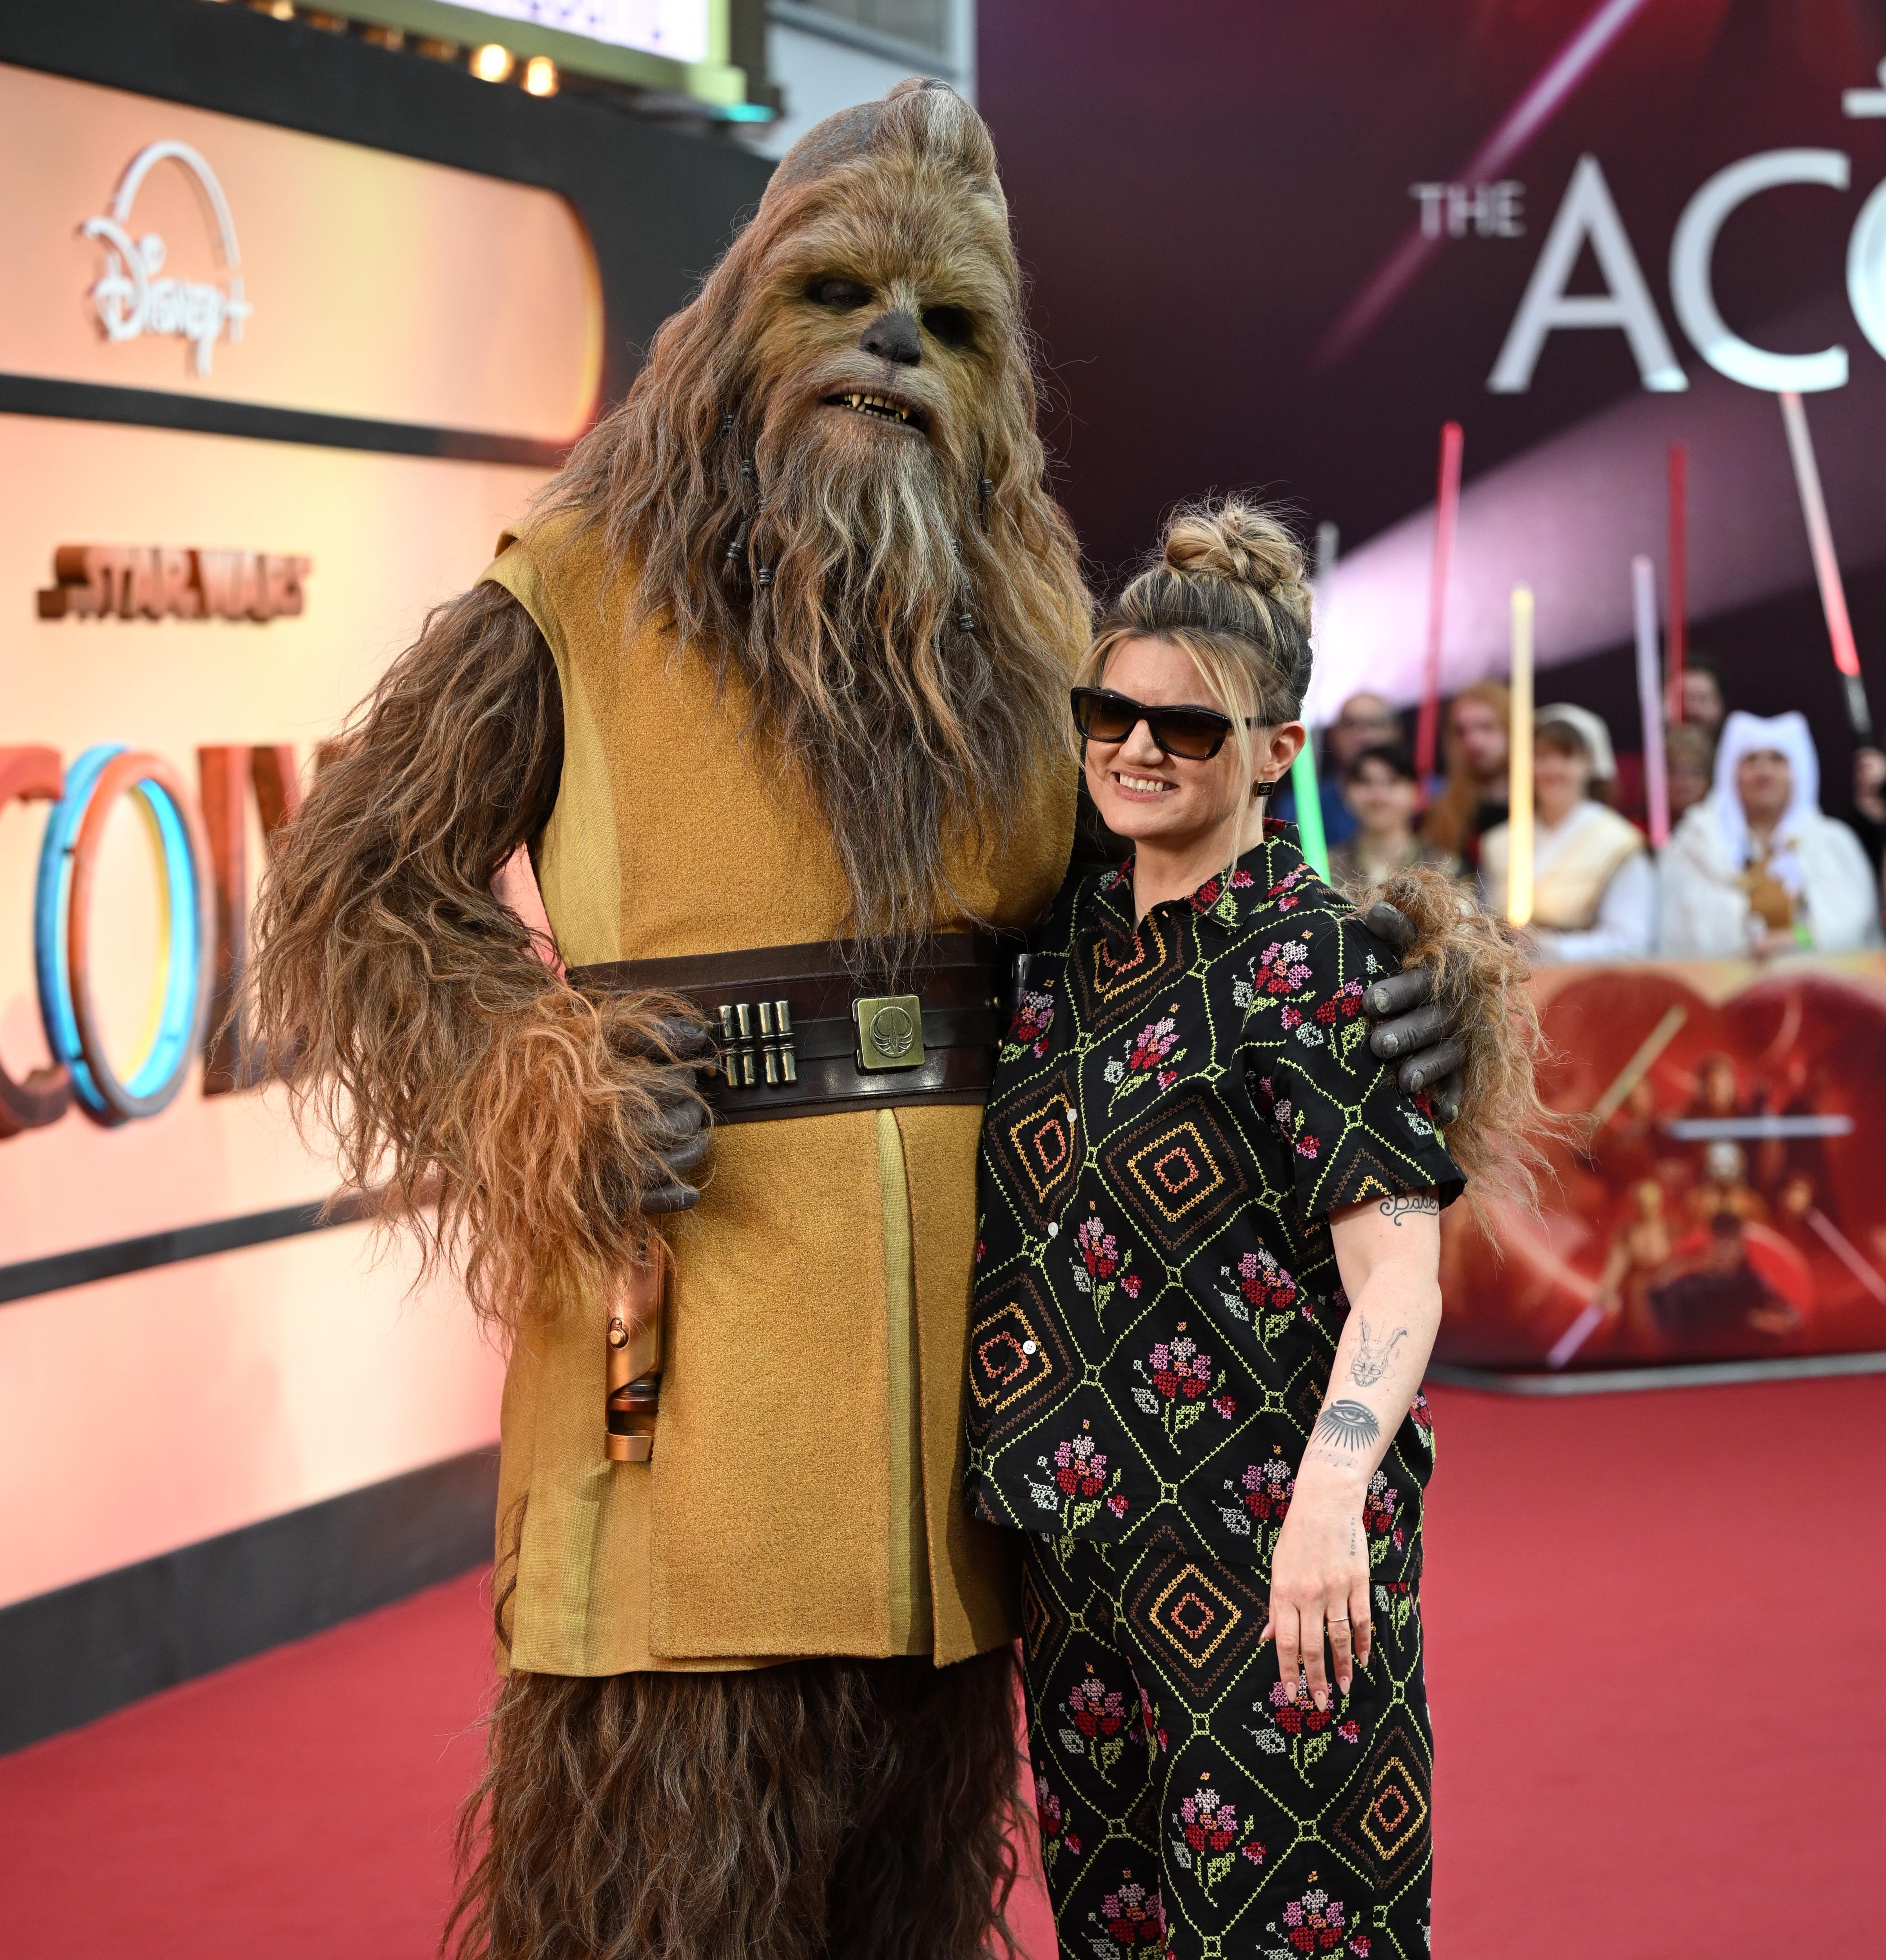 Leslye Headland in a cool outfit and sunglasses stands next to someone dressed as the wookiee